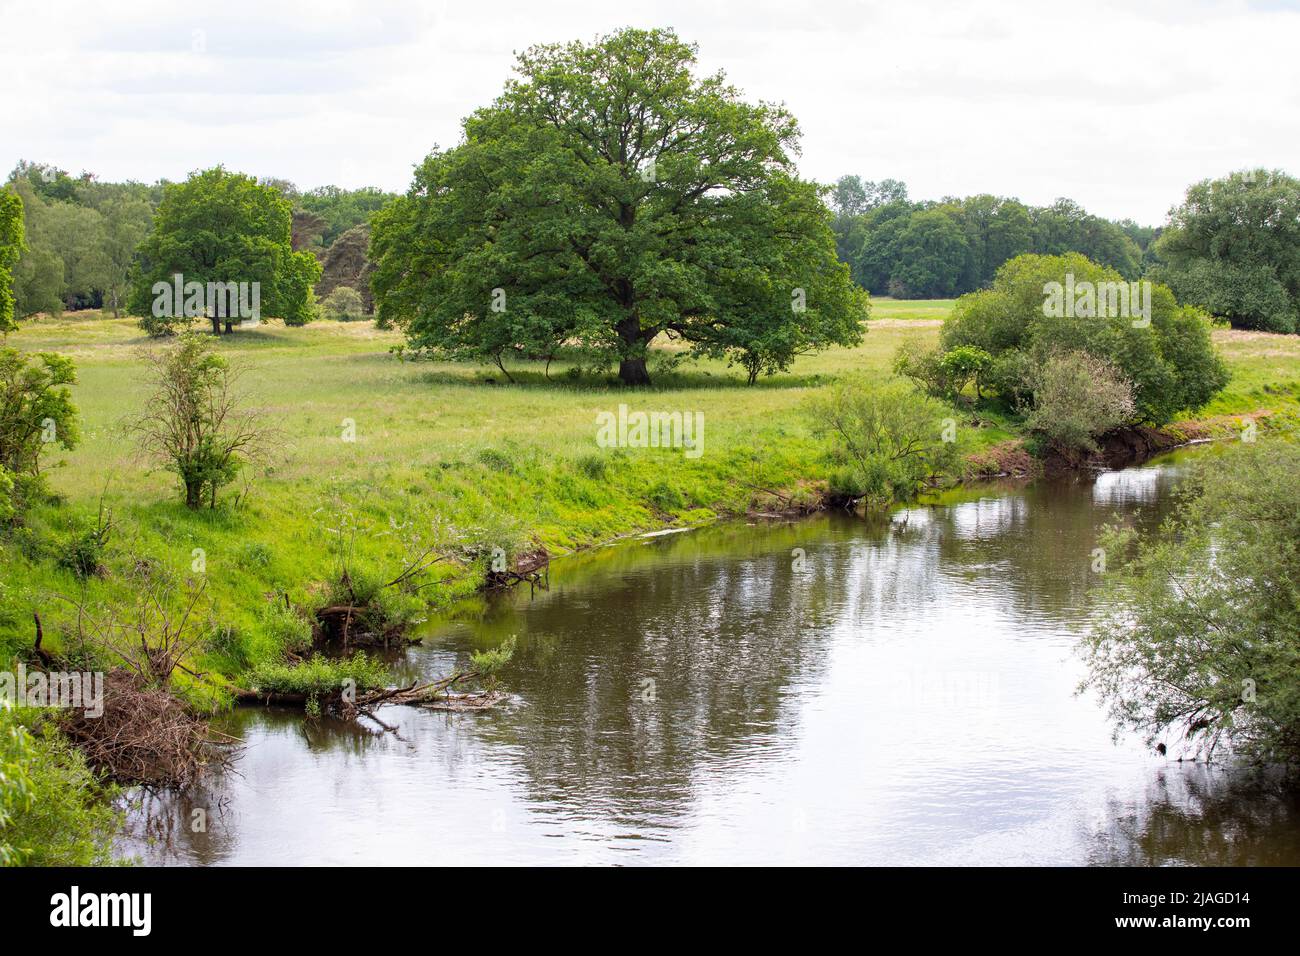 Landscape with river Haase with meadows and trees in Lower Saxony, Germany Stock Photo